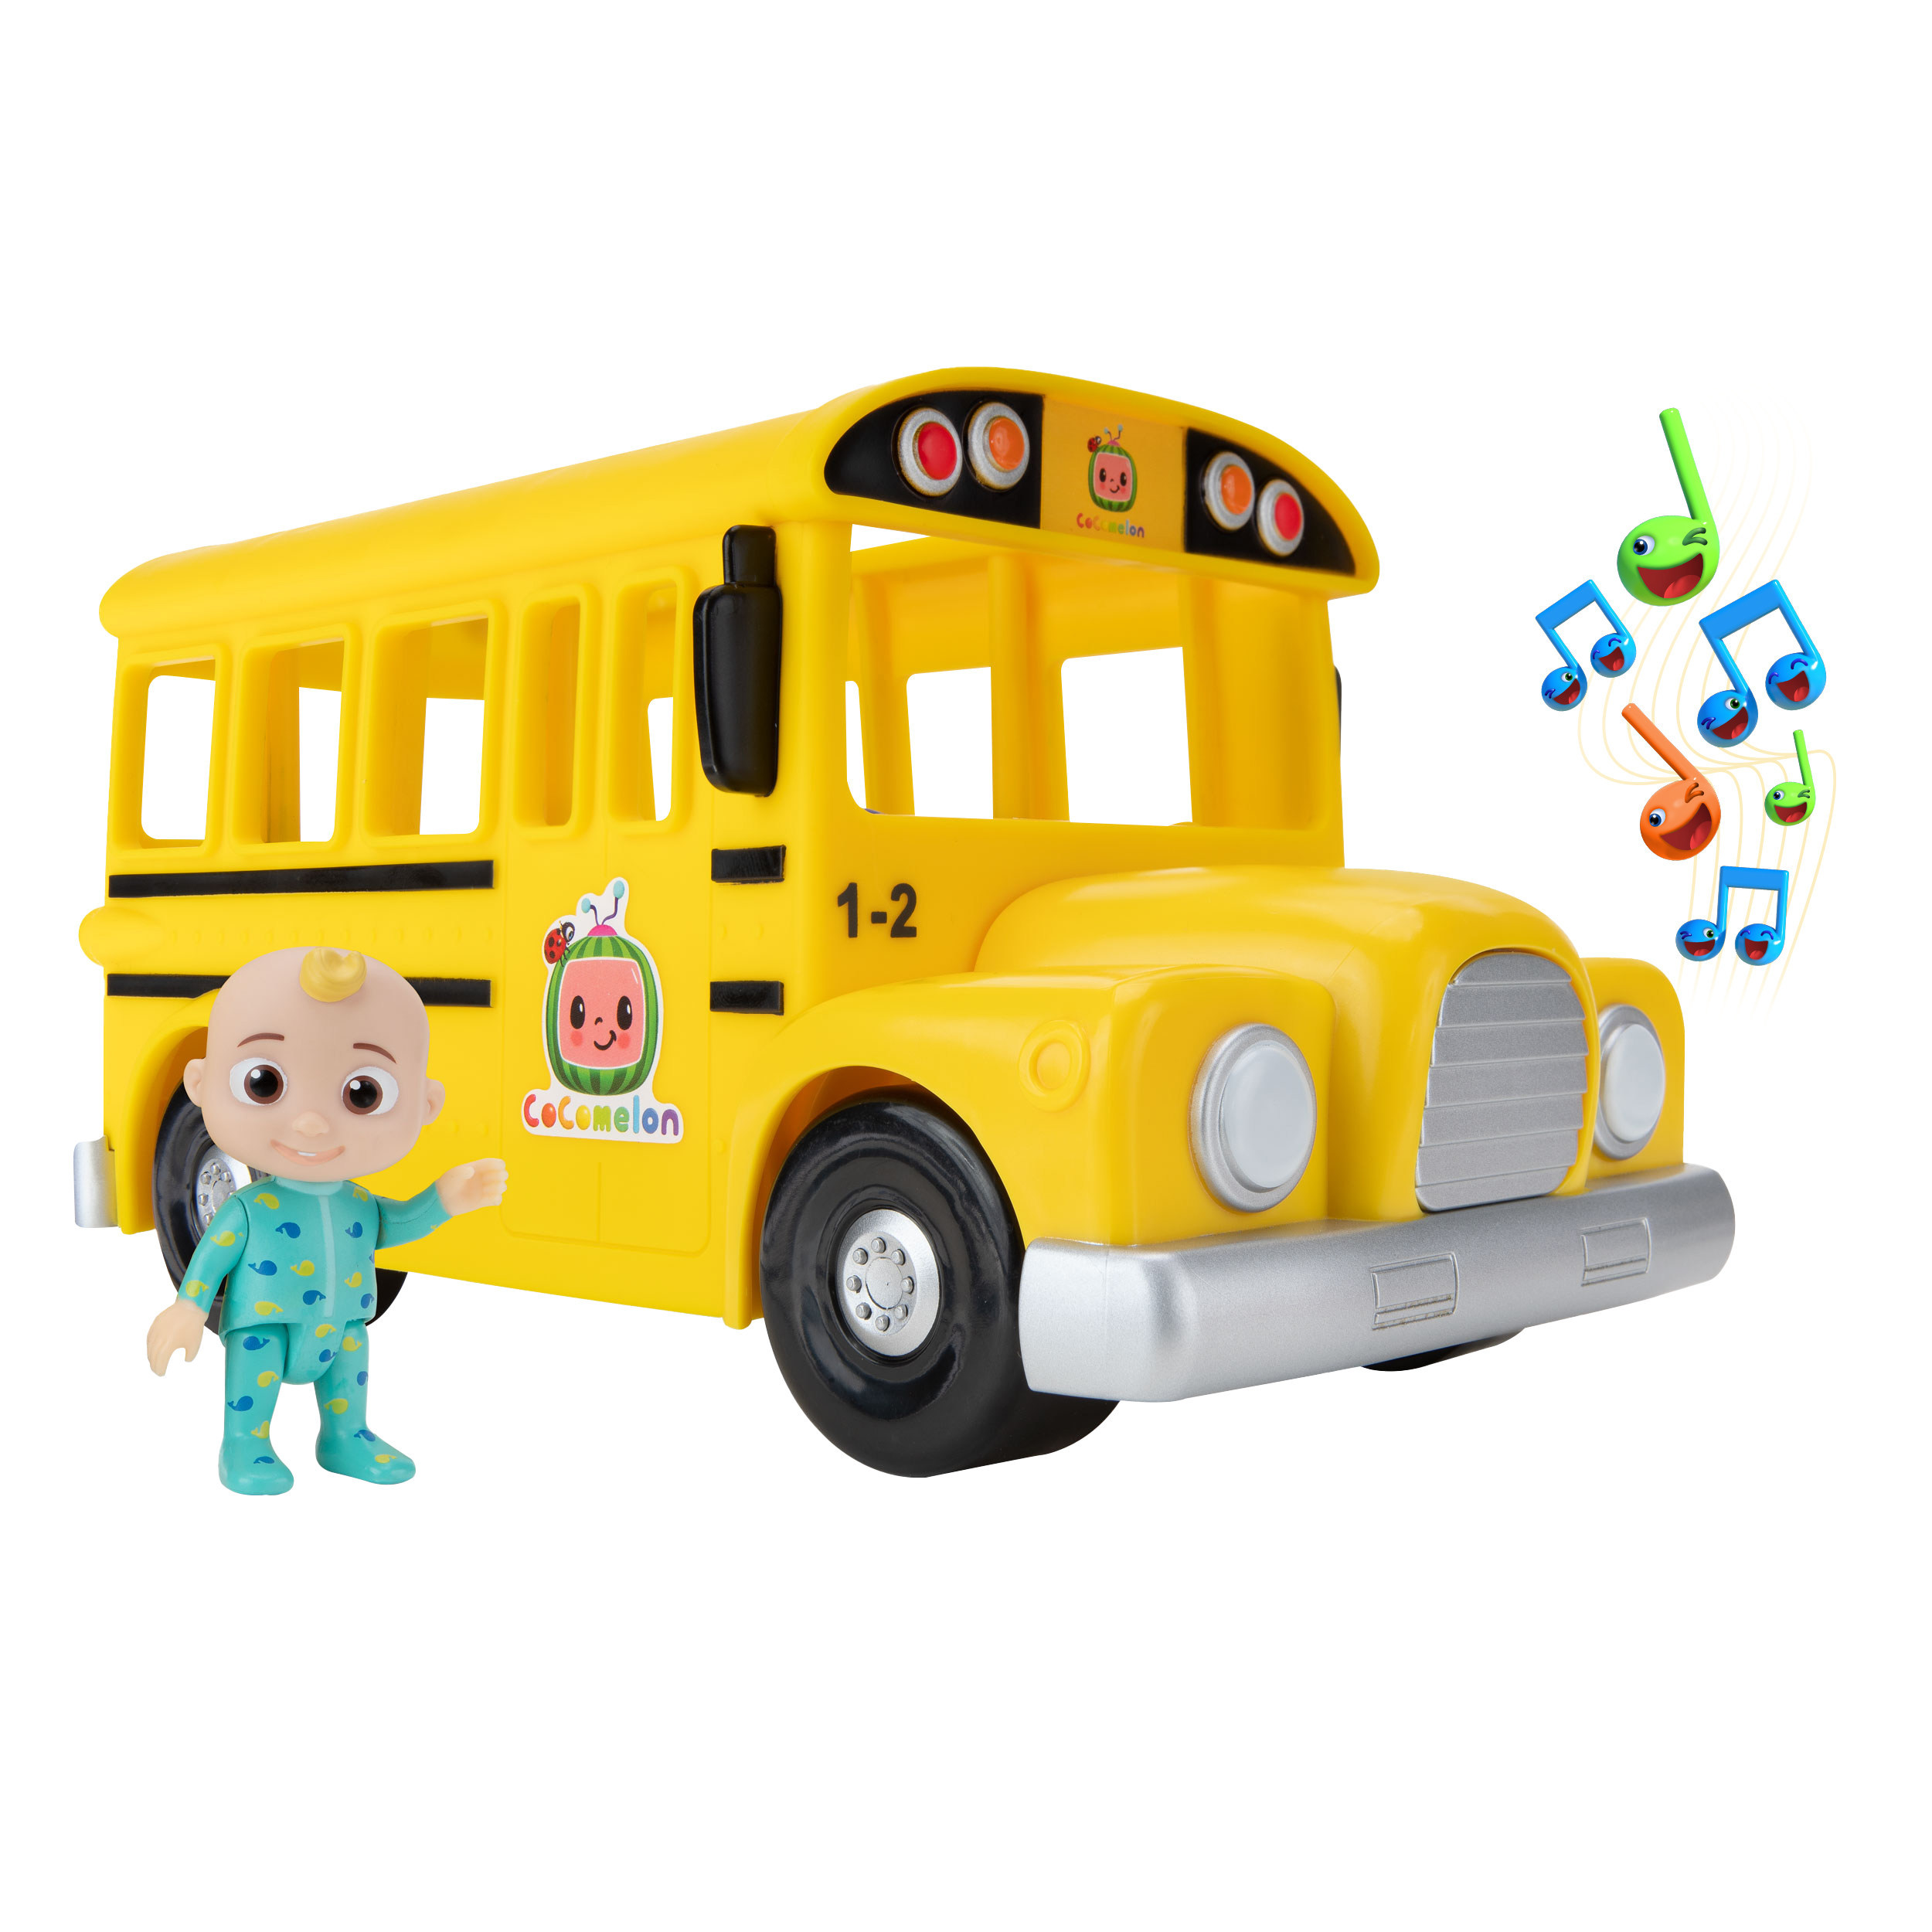 Jazwares Debuts First Toy Line For Cocomelon The 1 Youtube Channel For Kids And Preschoolers - game dev life roblox how to get truck